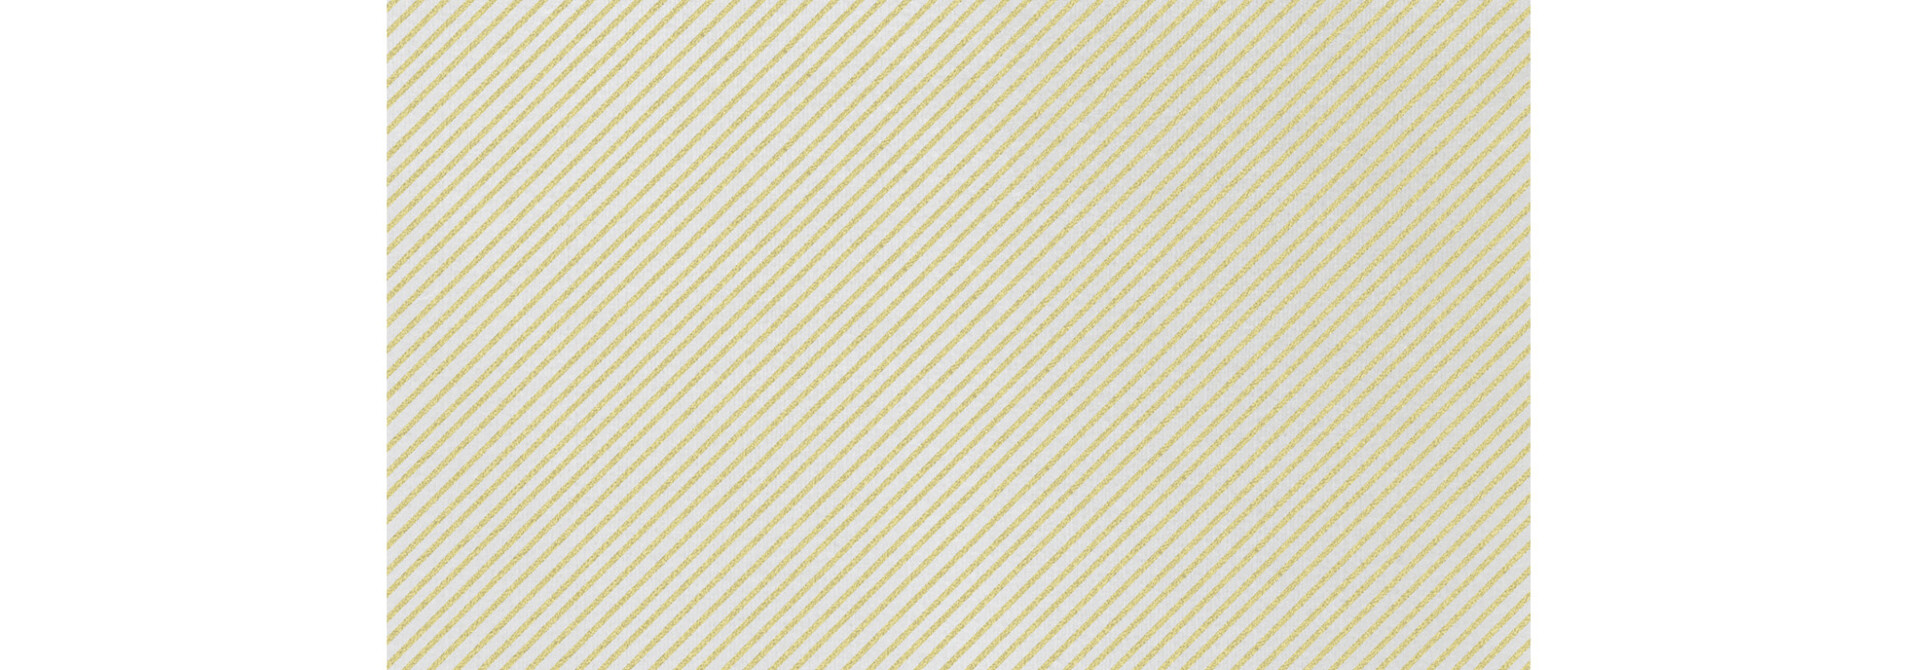 Seersucker Stripe | The Papersoft Dinner Napkin Collection Pack of 50, Linen